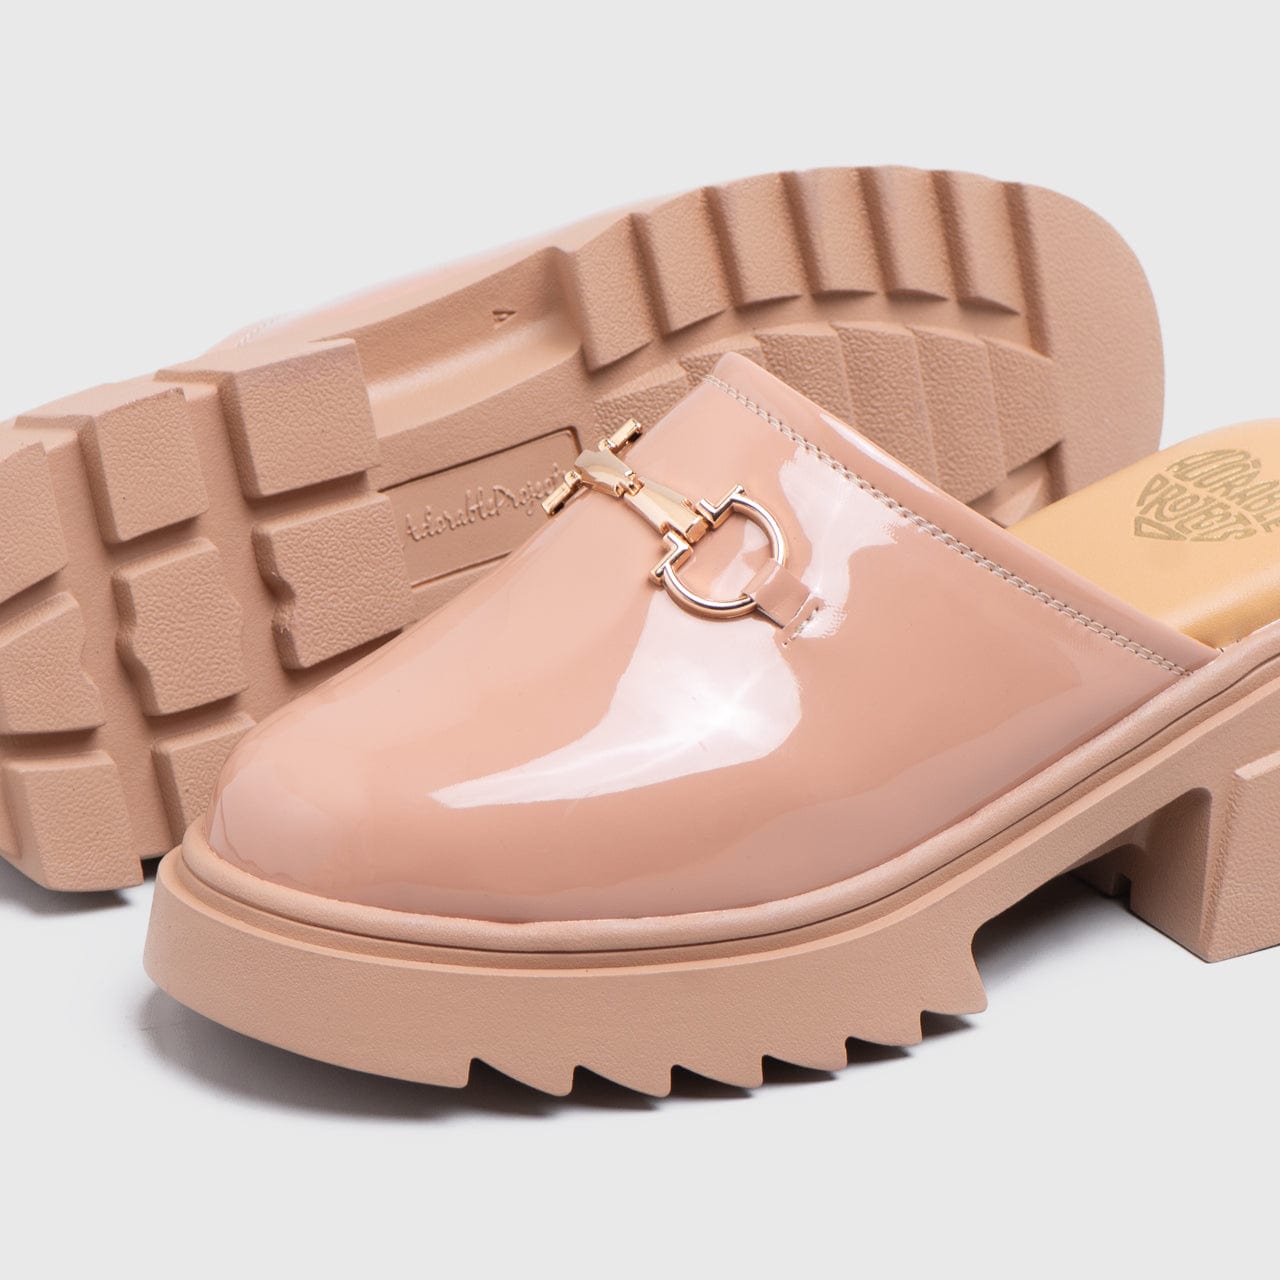 Adorable Projects Official Gamila Sandals Patent Nude